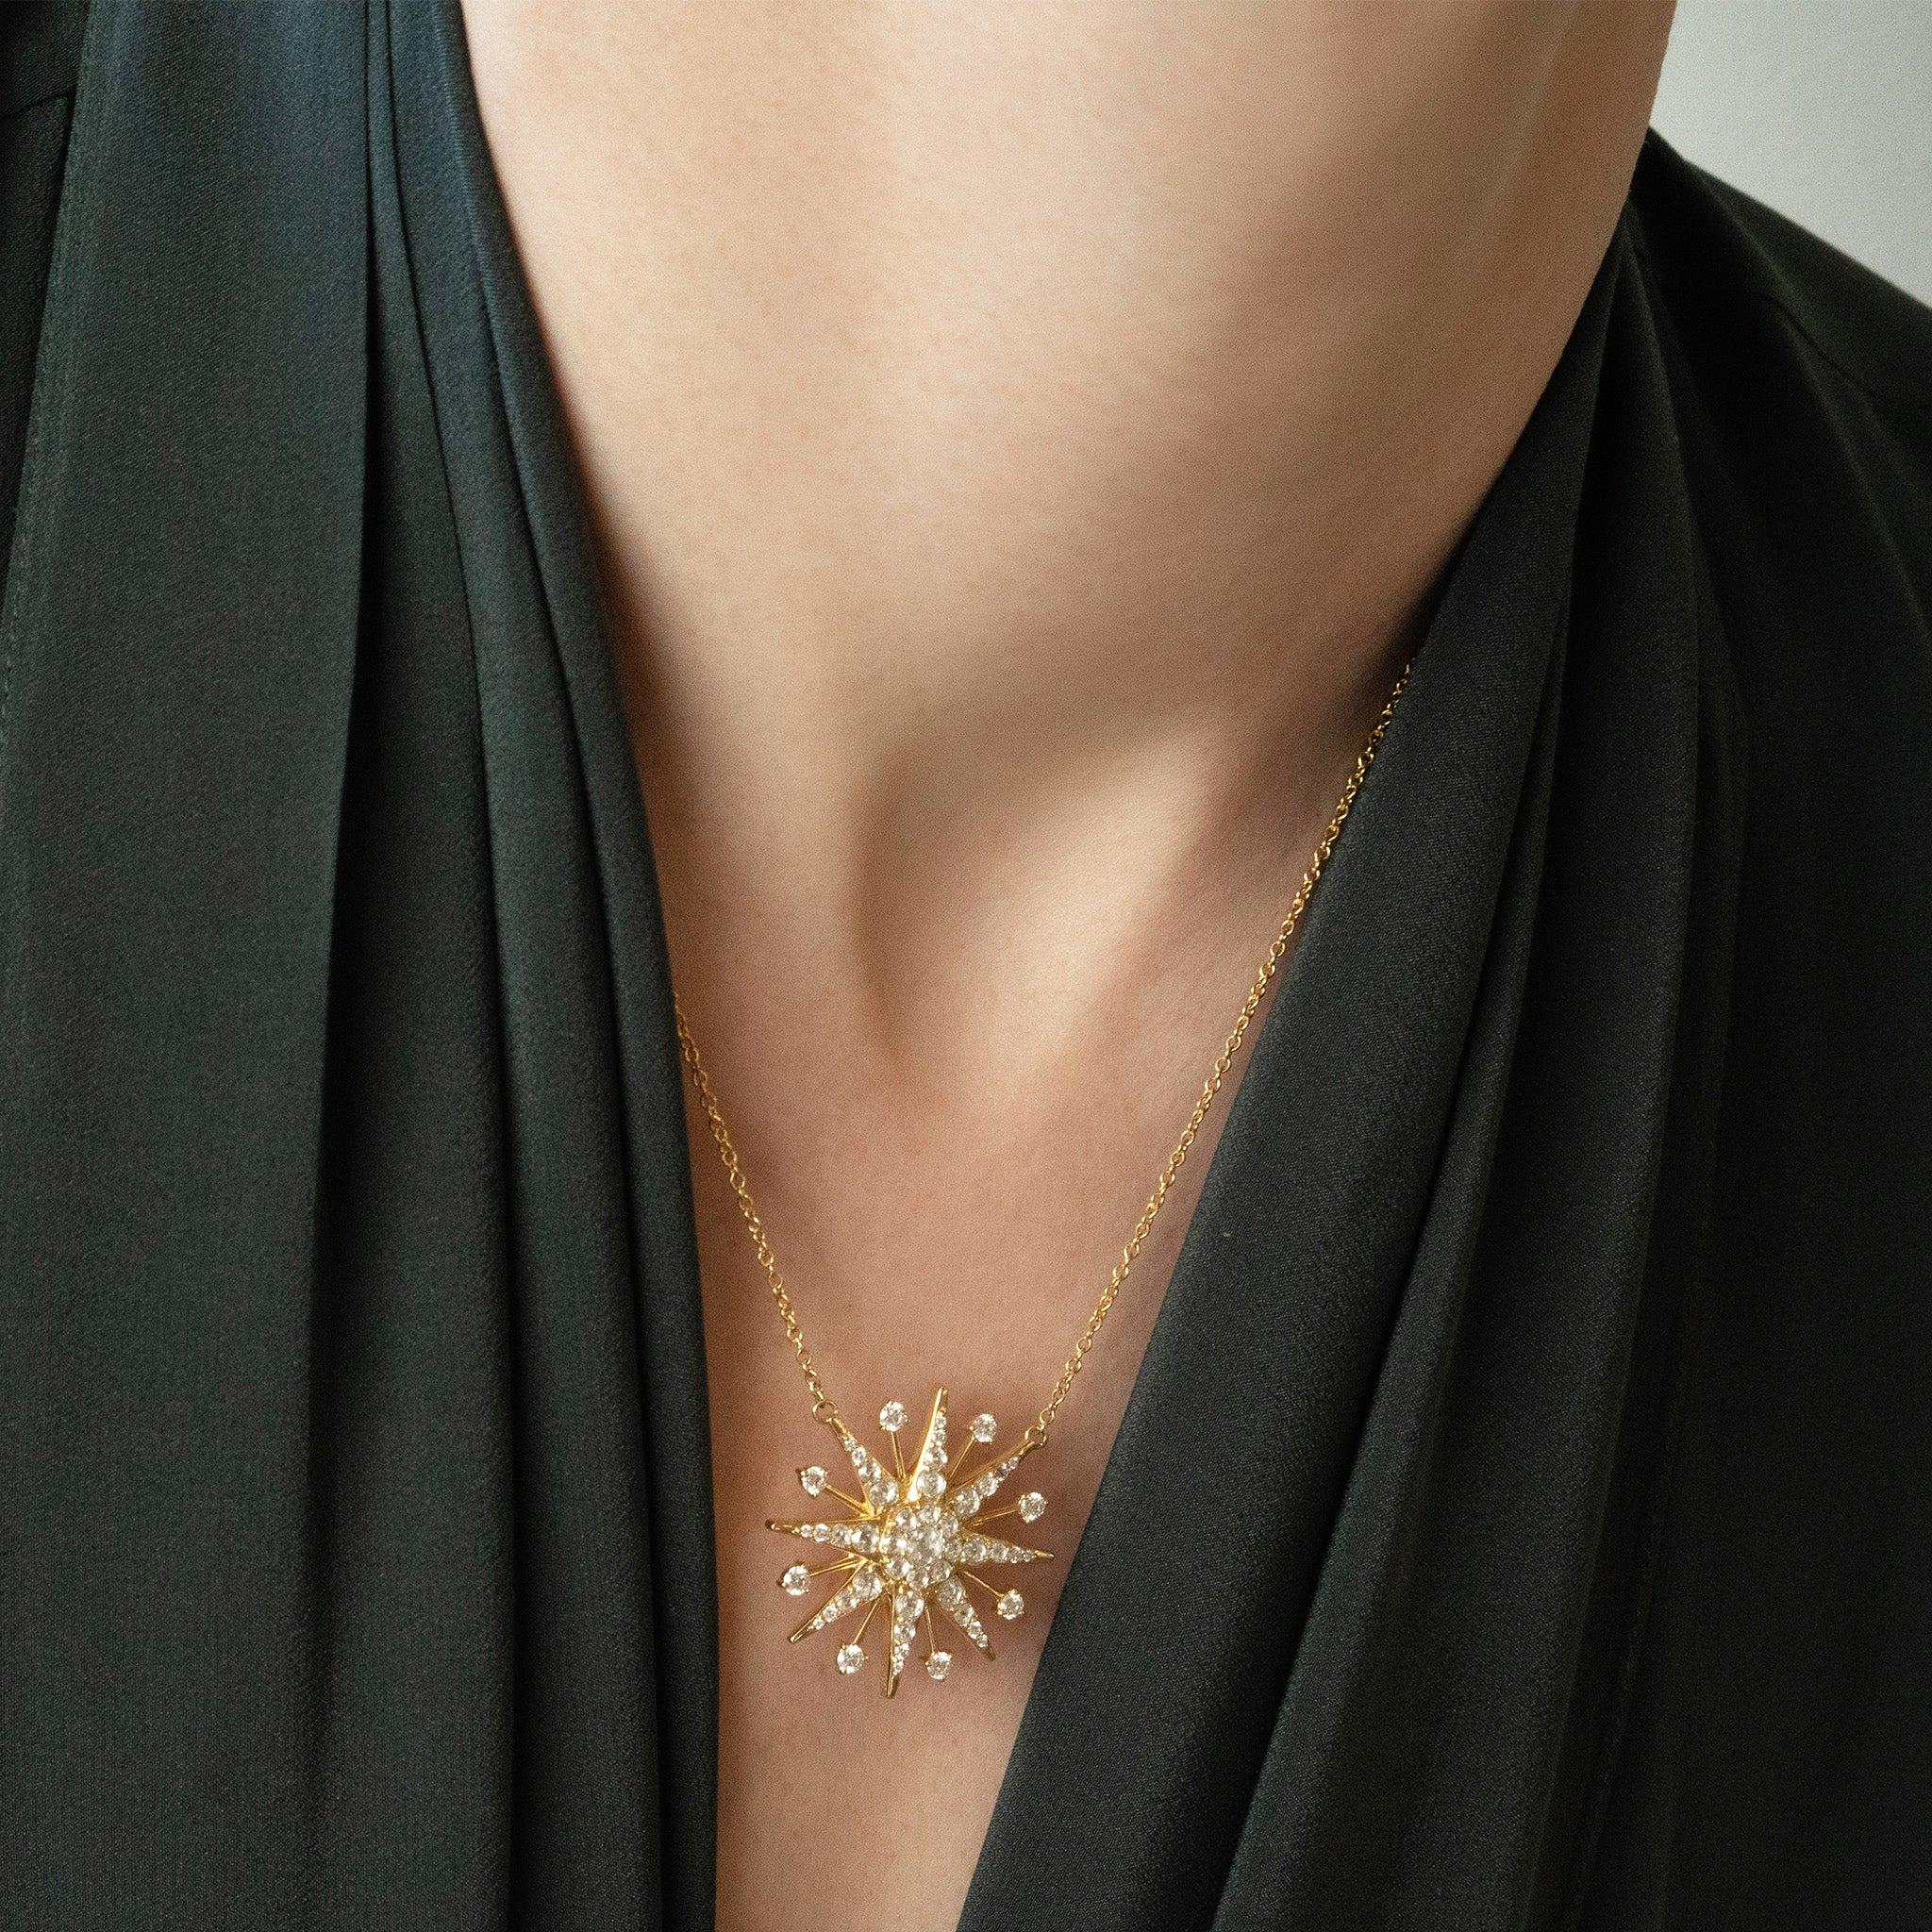 Reach for the stars. This Monica Rich Kosann 18K Yellow Gold Star Necklace features Diamonds and is presented on an 18